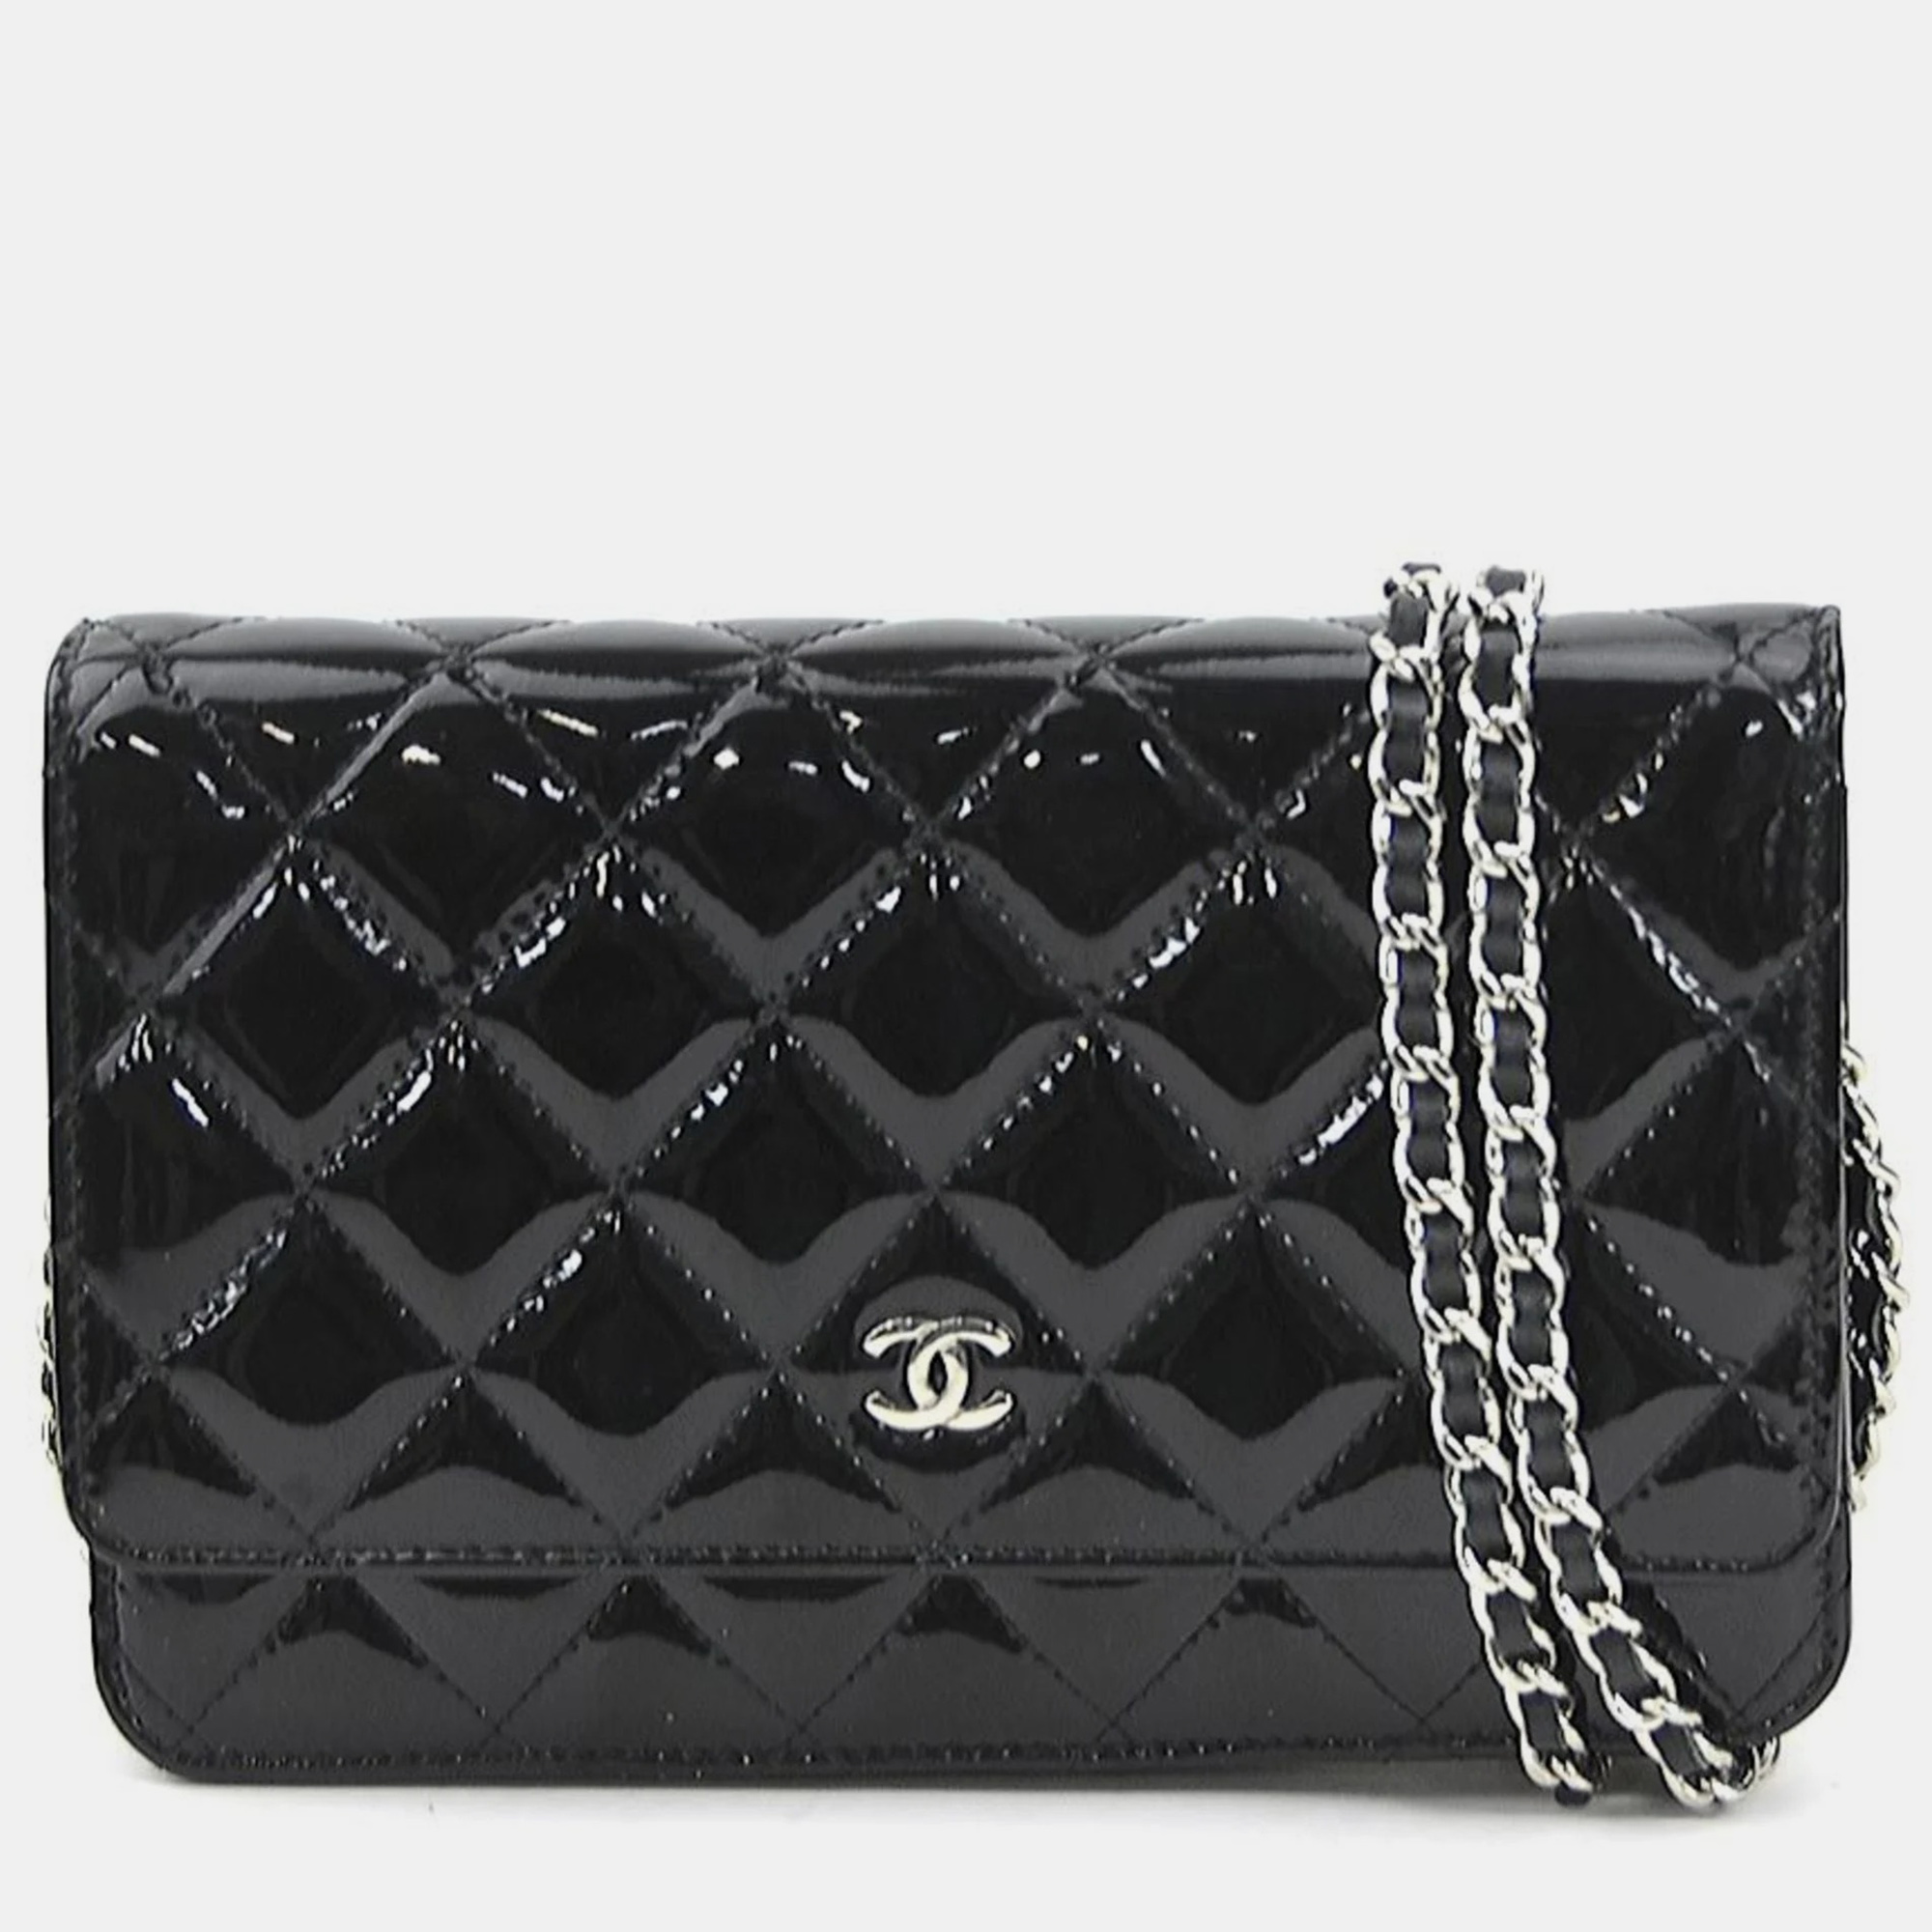 Chanel black patent leather cc wallet on chain